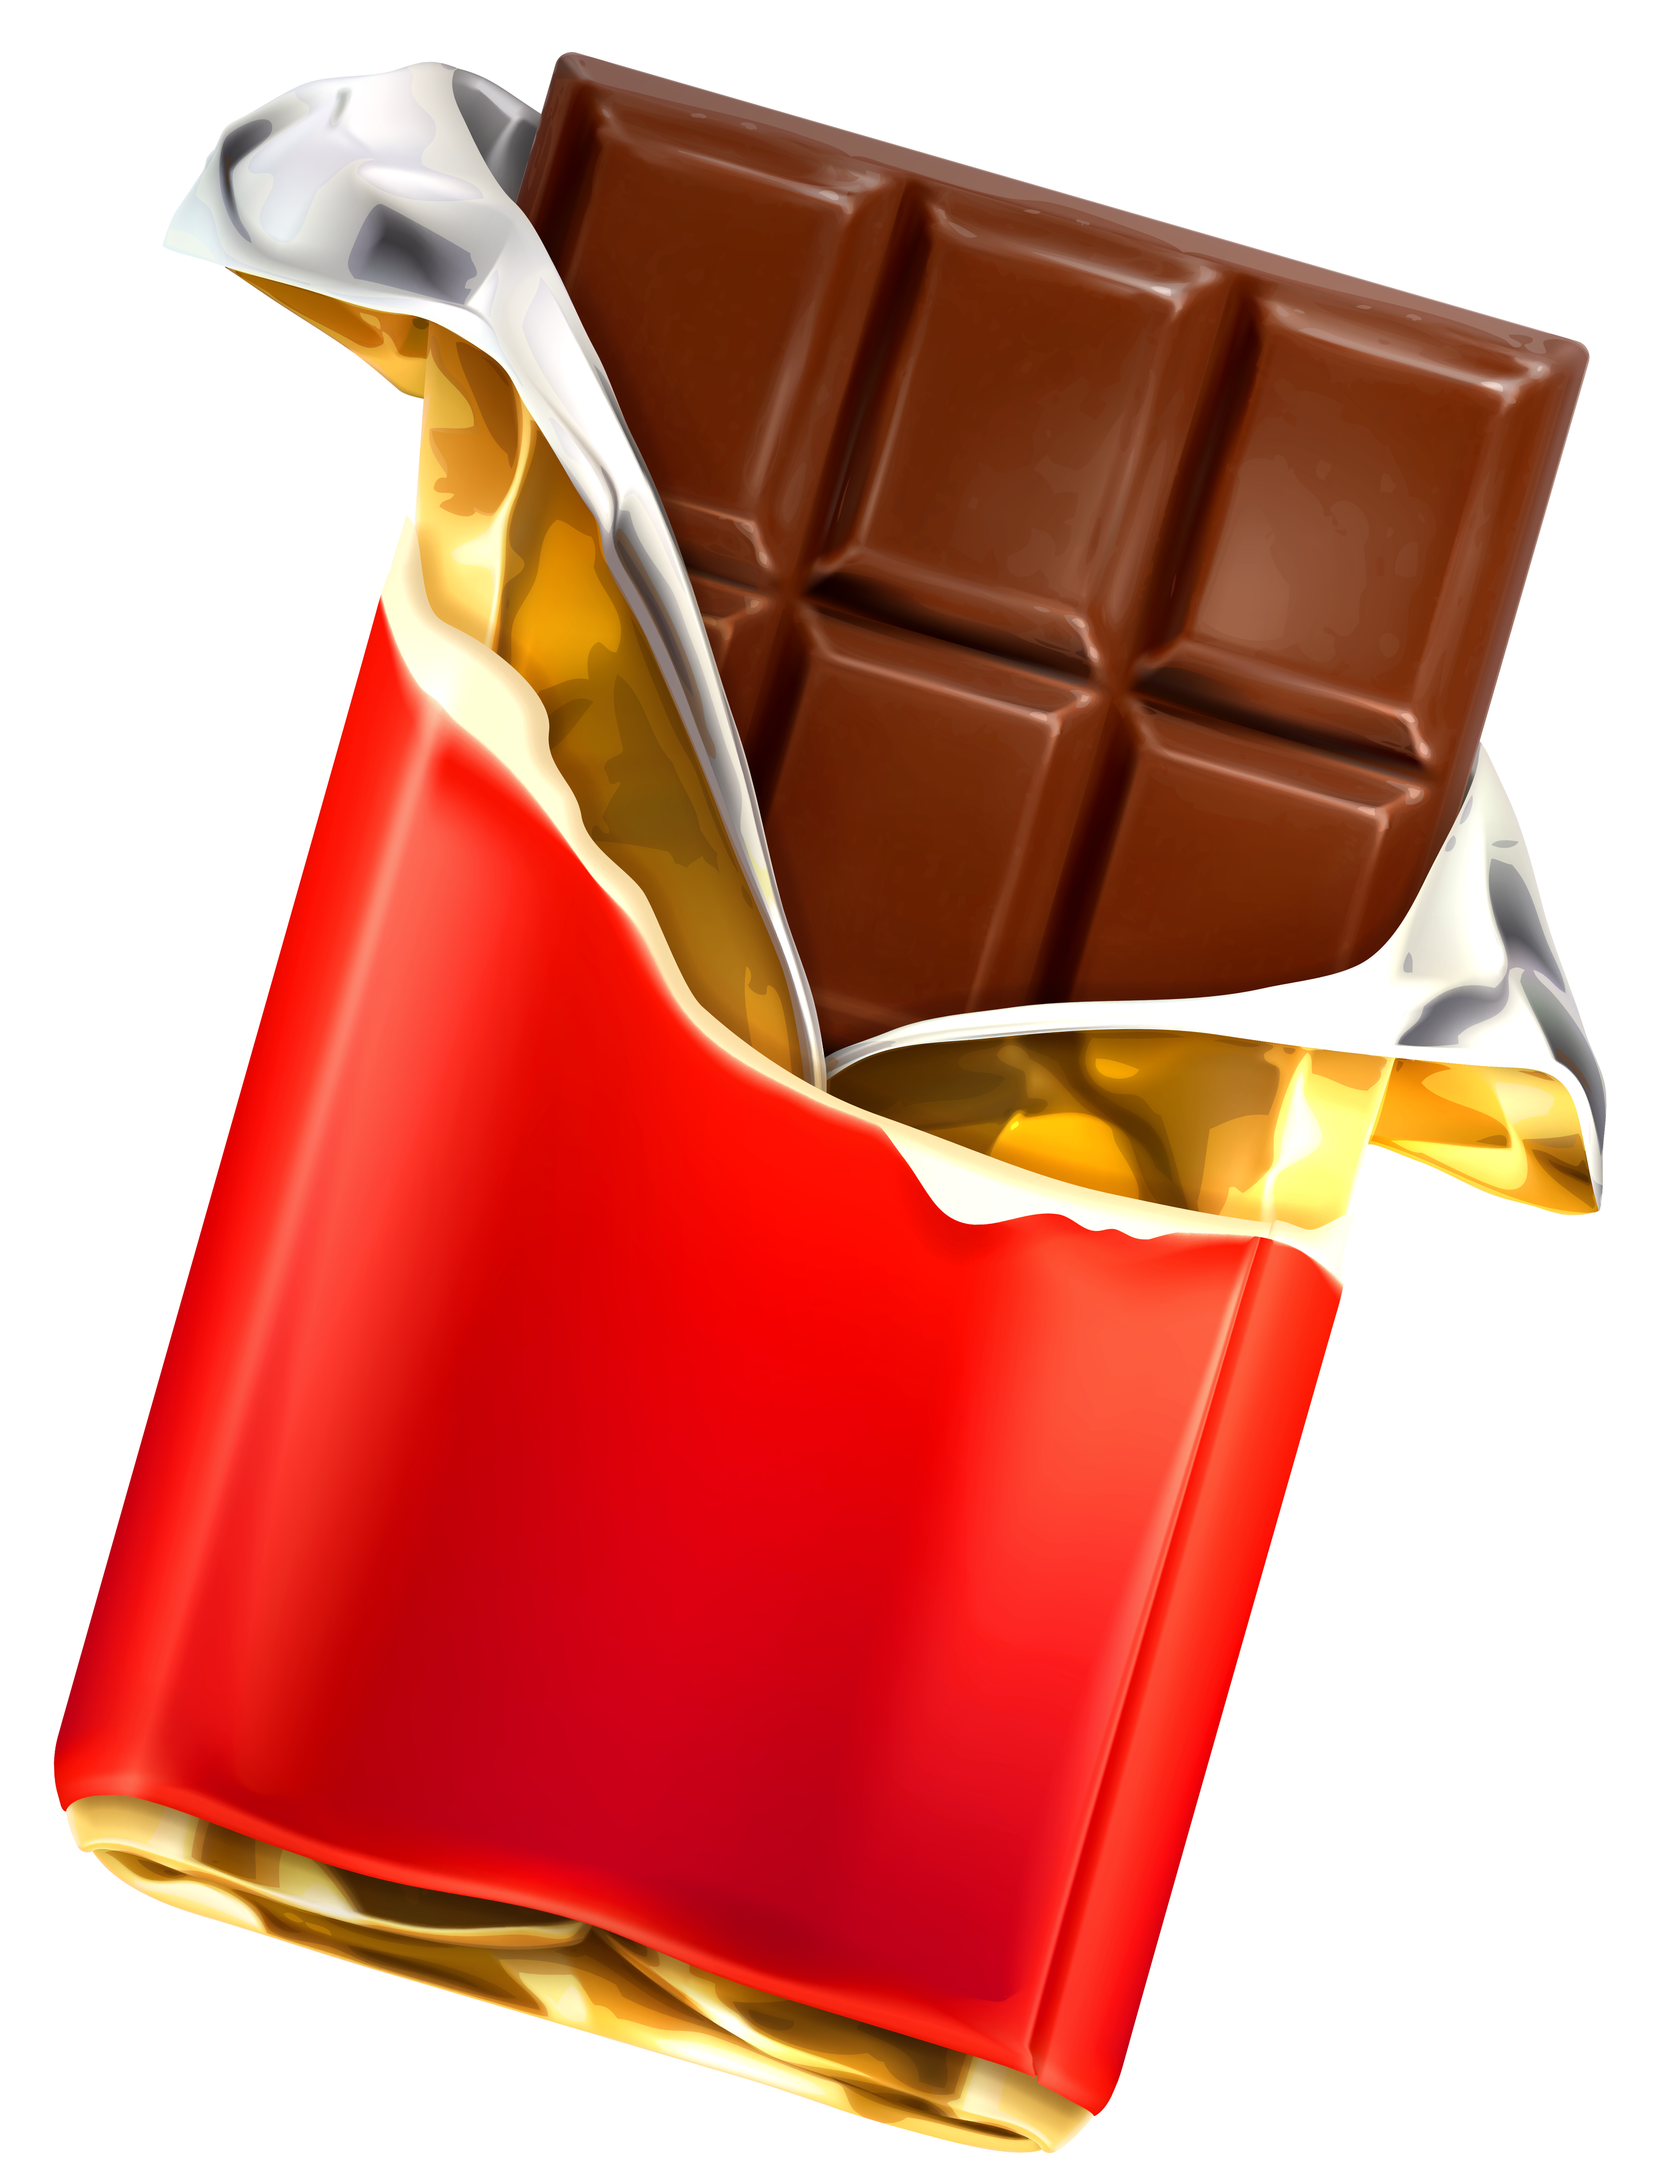 Chocolate clip art images ill